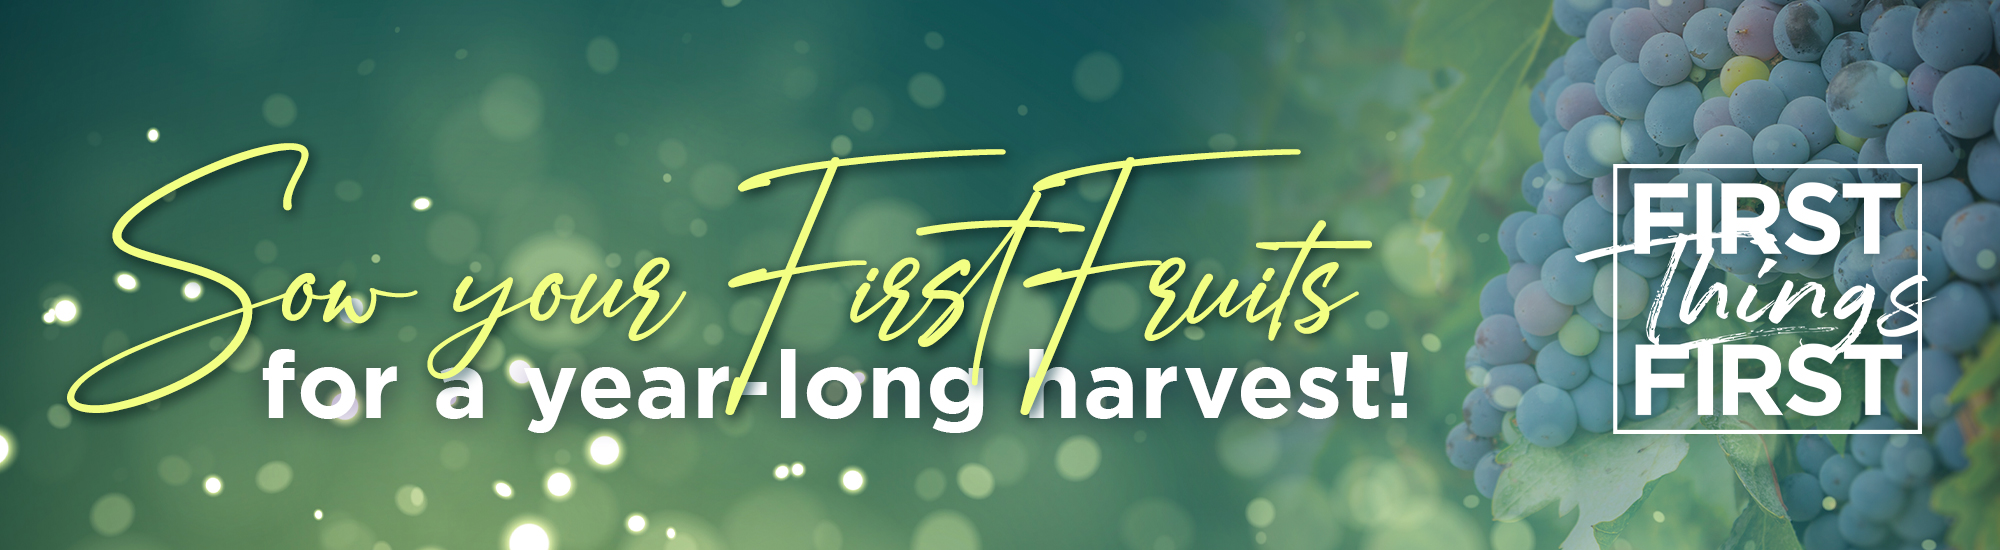 Sow your FirstFruits for a year-long harvest! First Things First